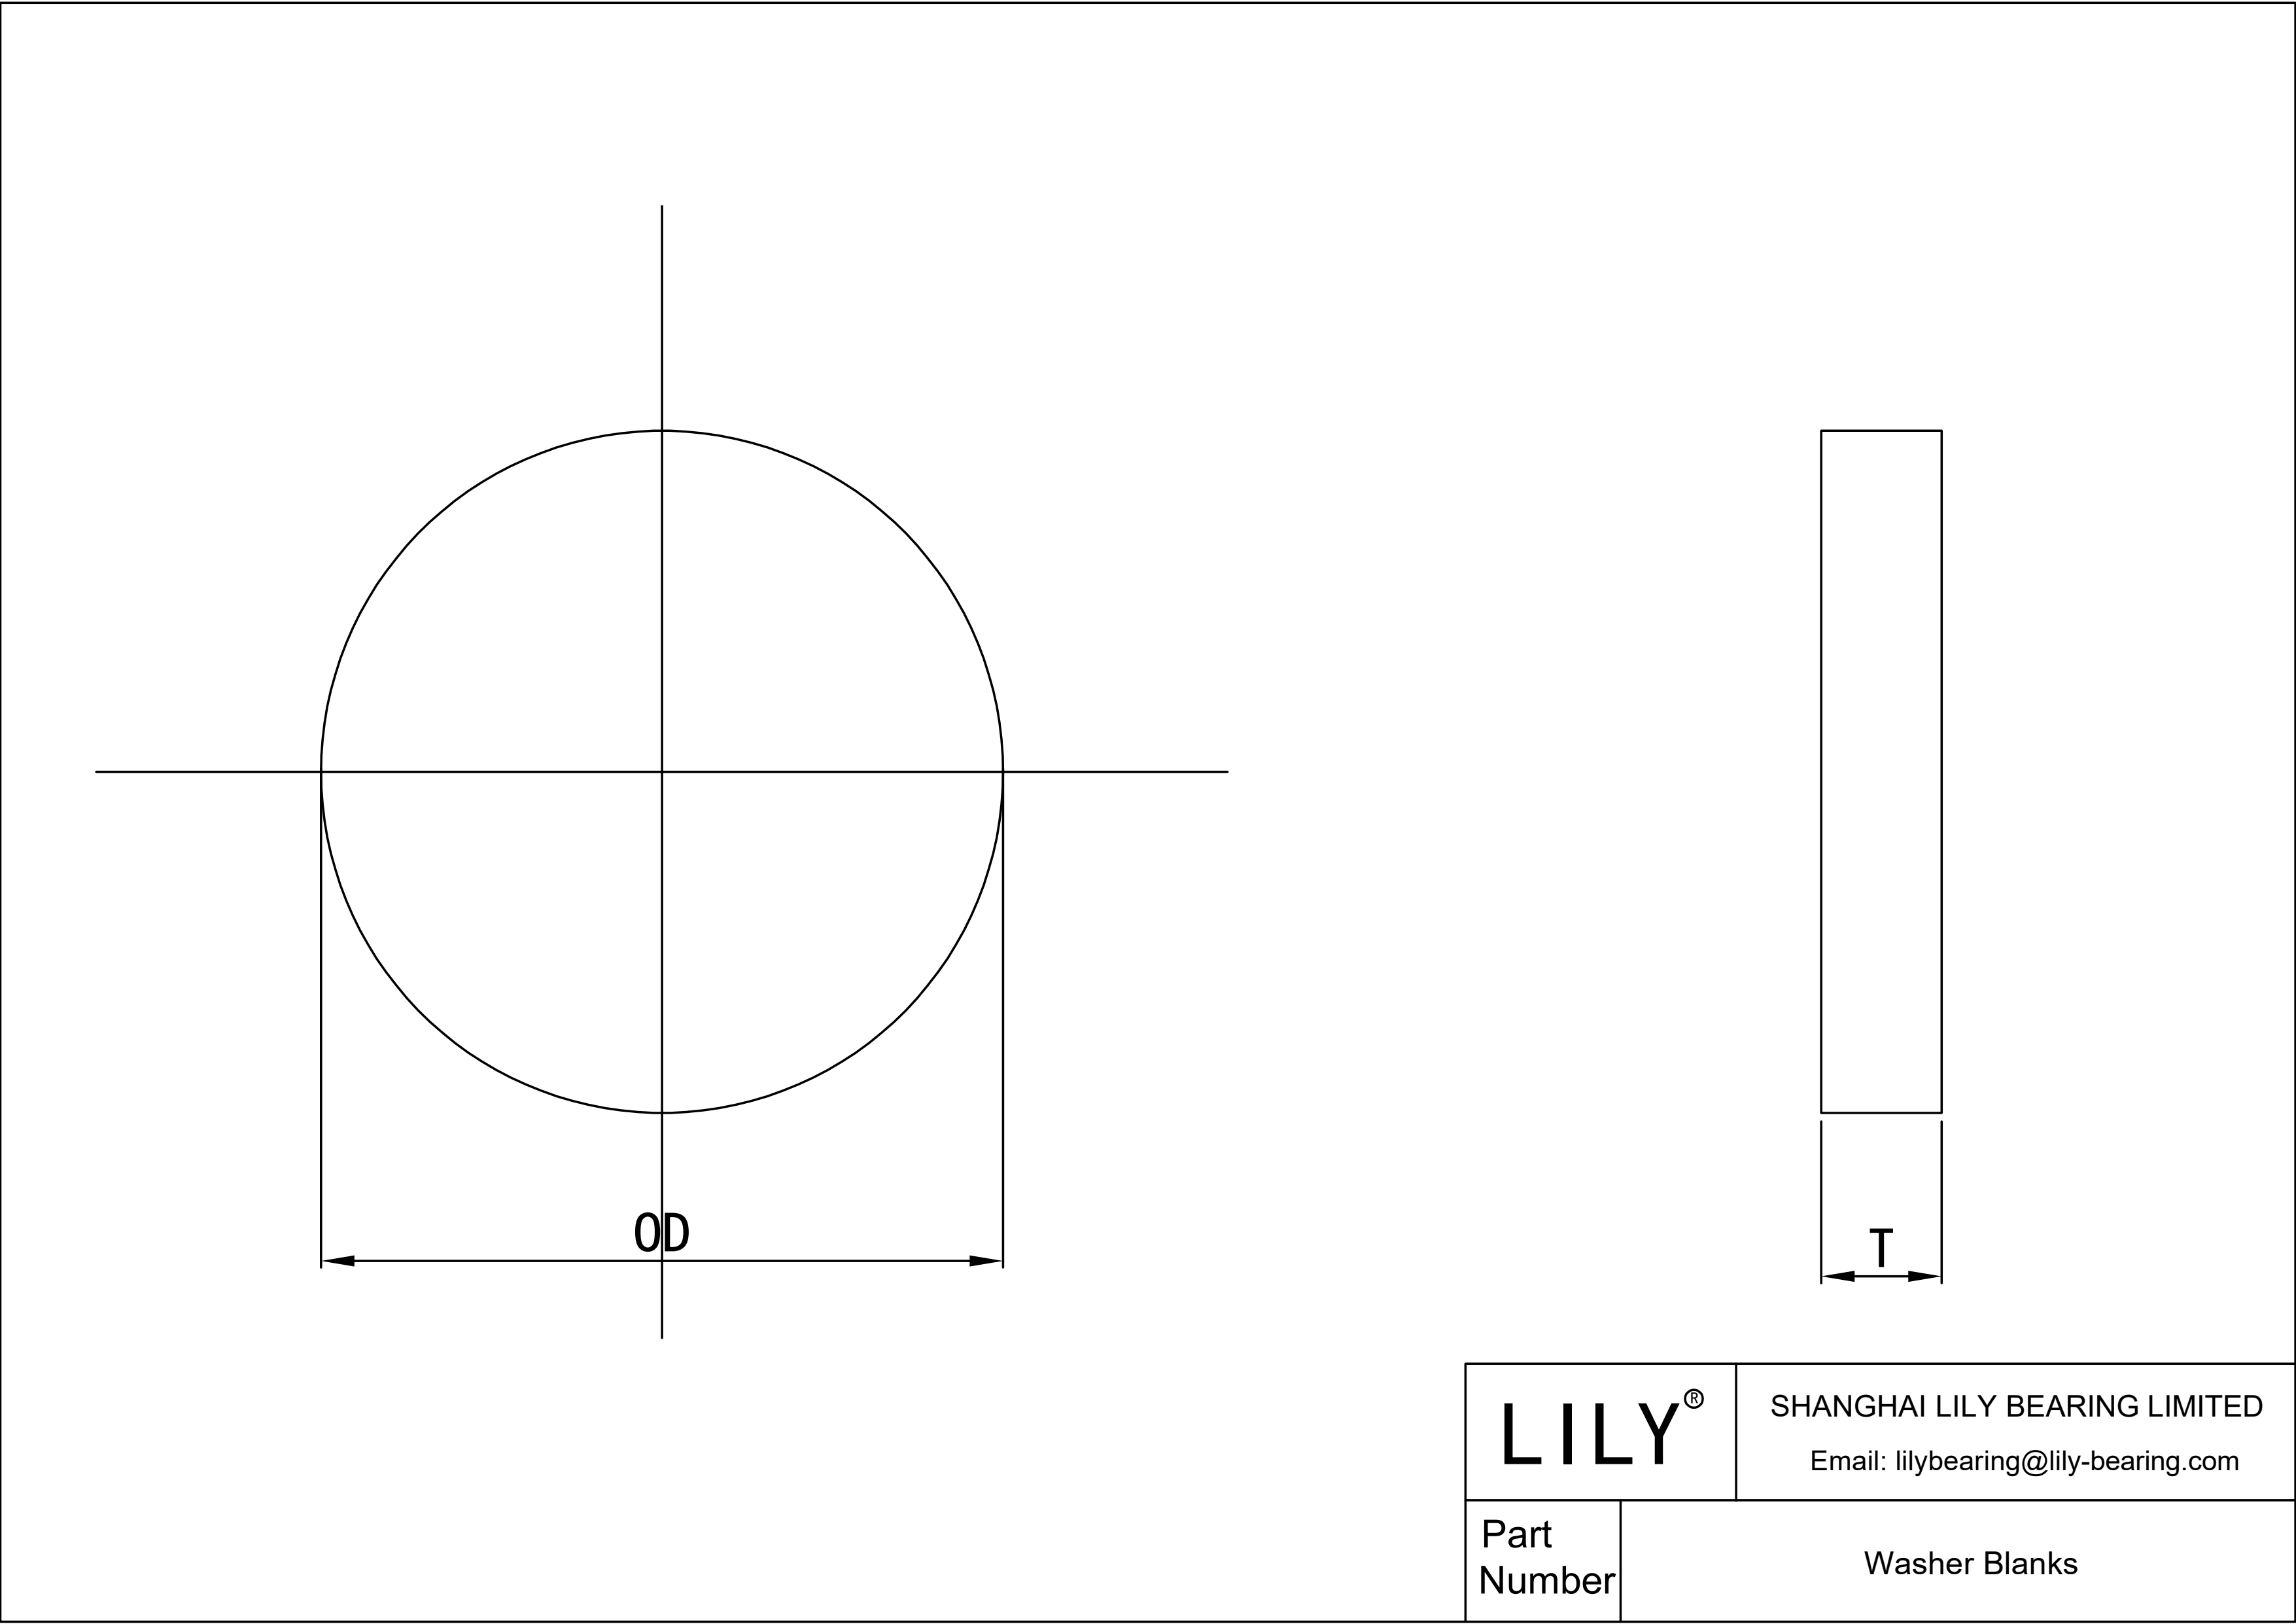 JDCHEAICA Washer Blanks cad drawing